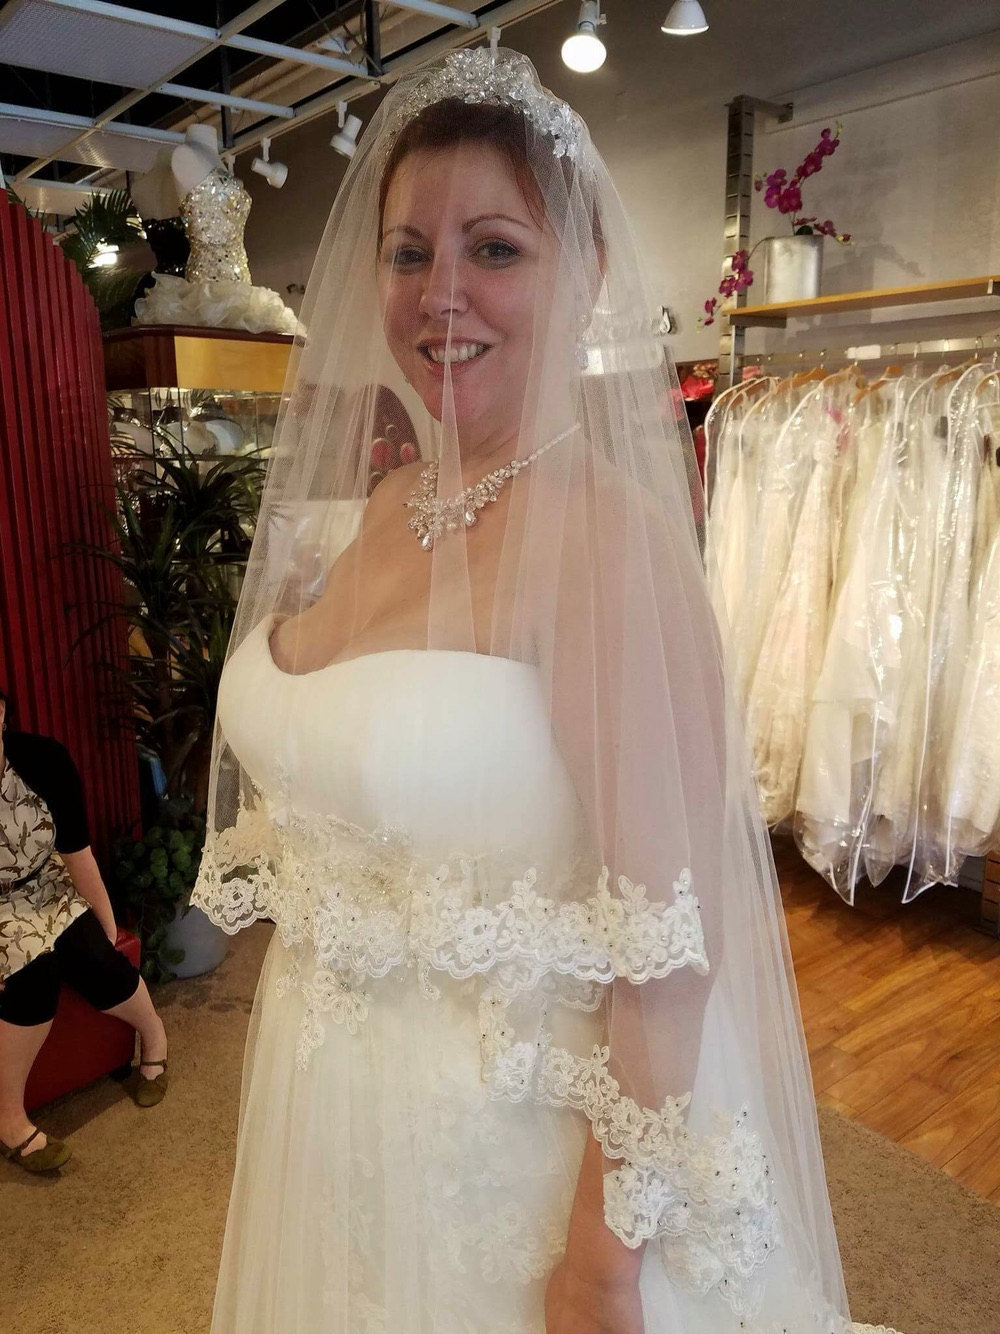 One Blushing Bride Fingertip Length Mantilla Wedding Veil with Beaded Lace Trim White / Fingertip 35-38 inch / No Beading